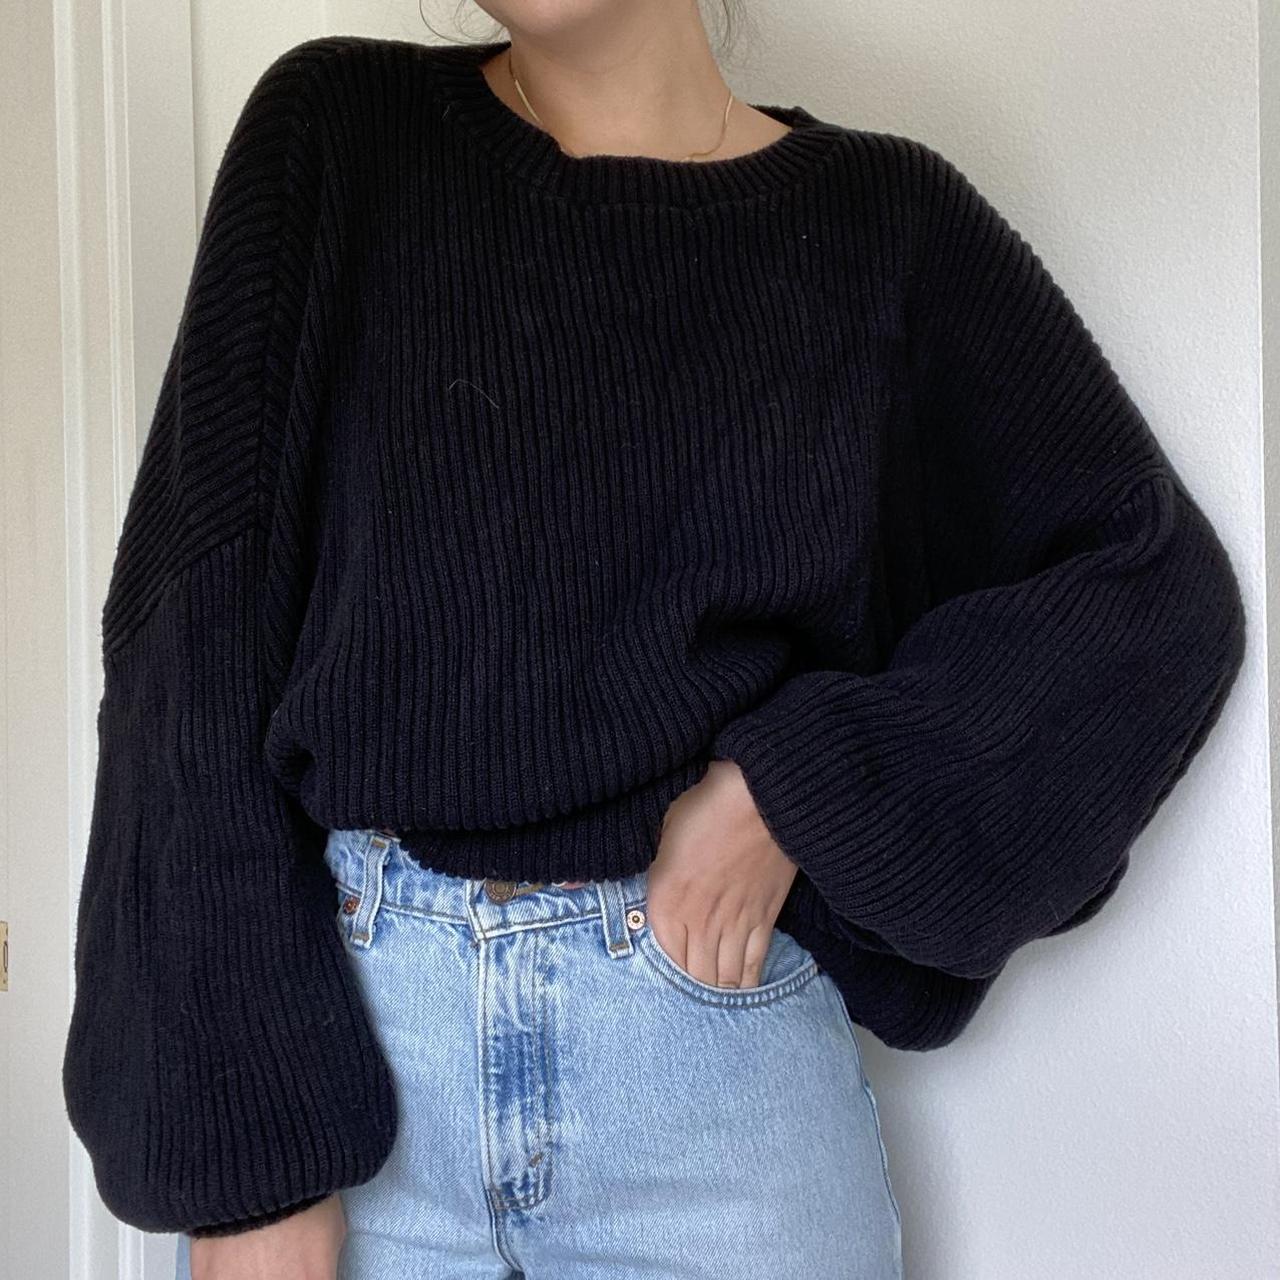 Really cute slouchy oversized black ribbed vintage... - Depop